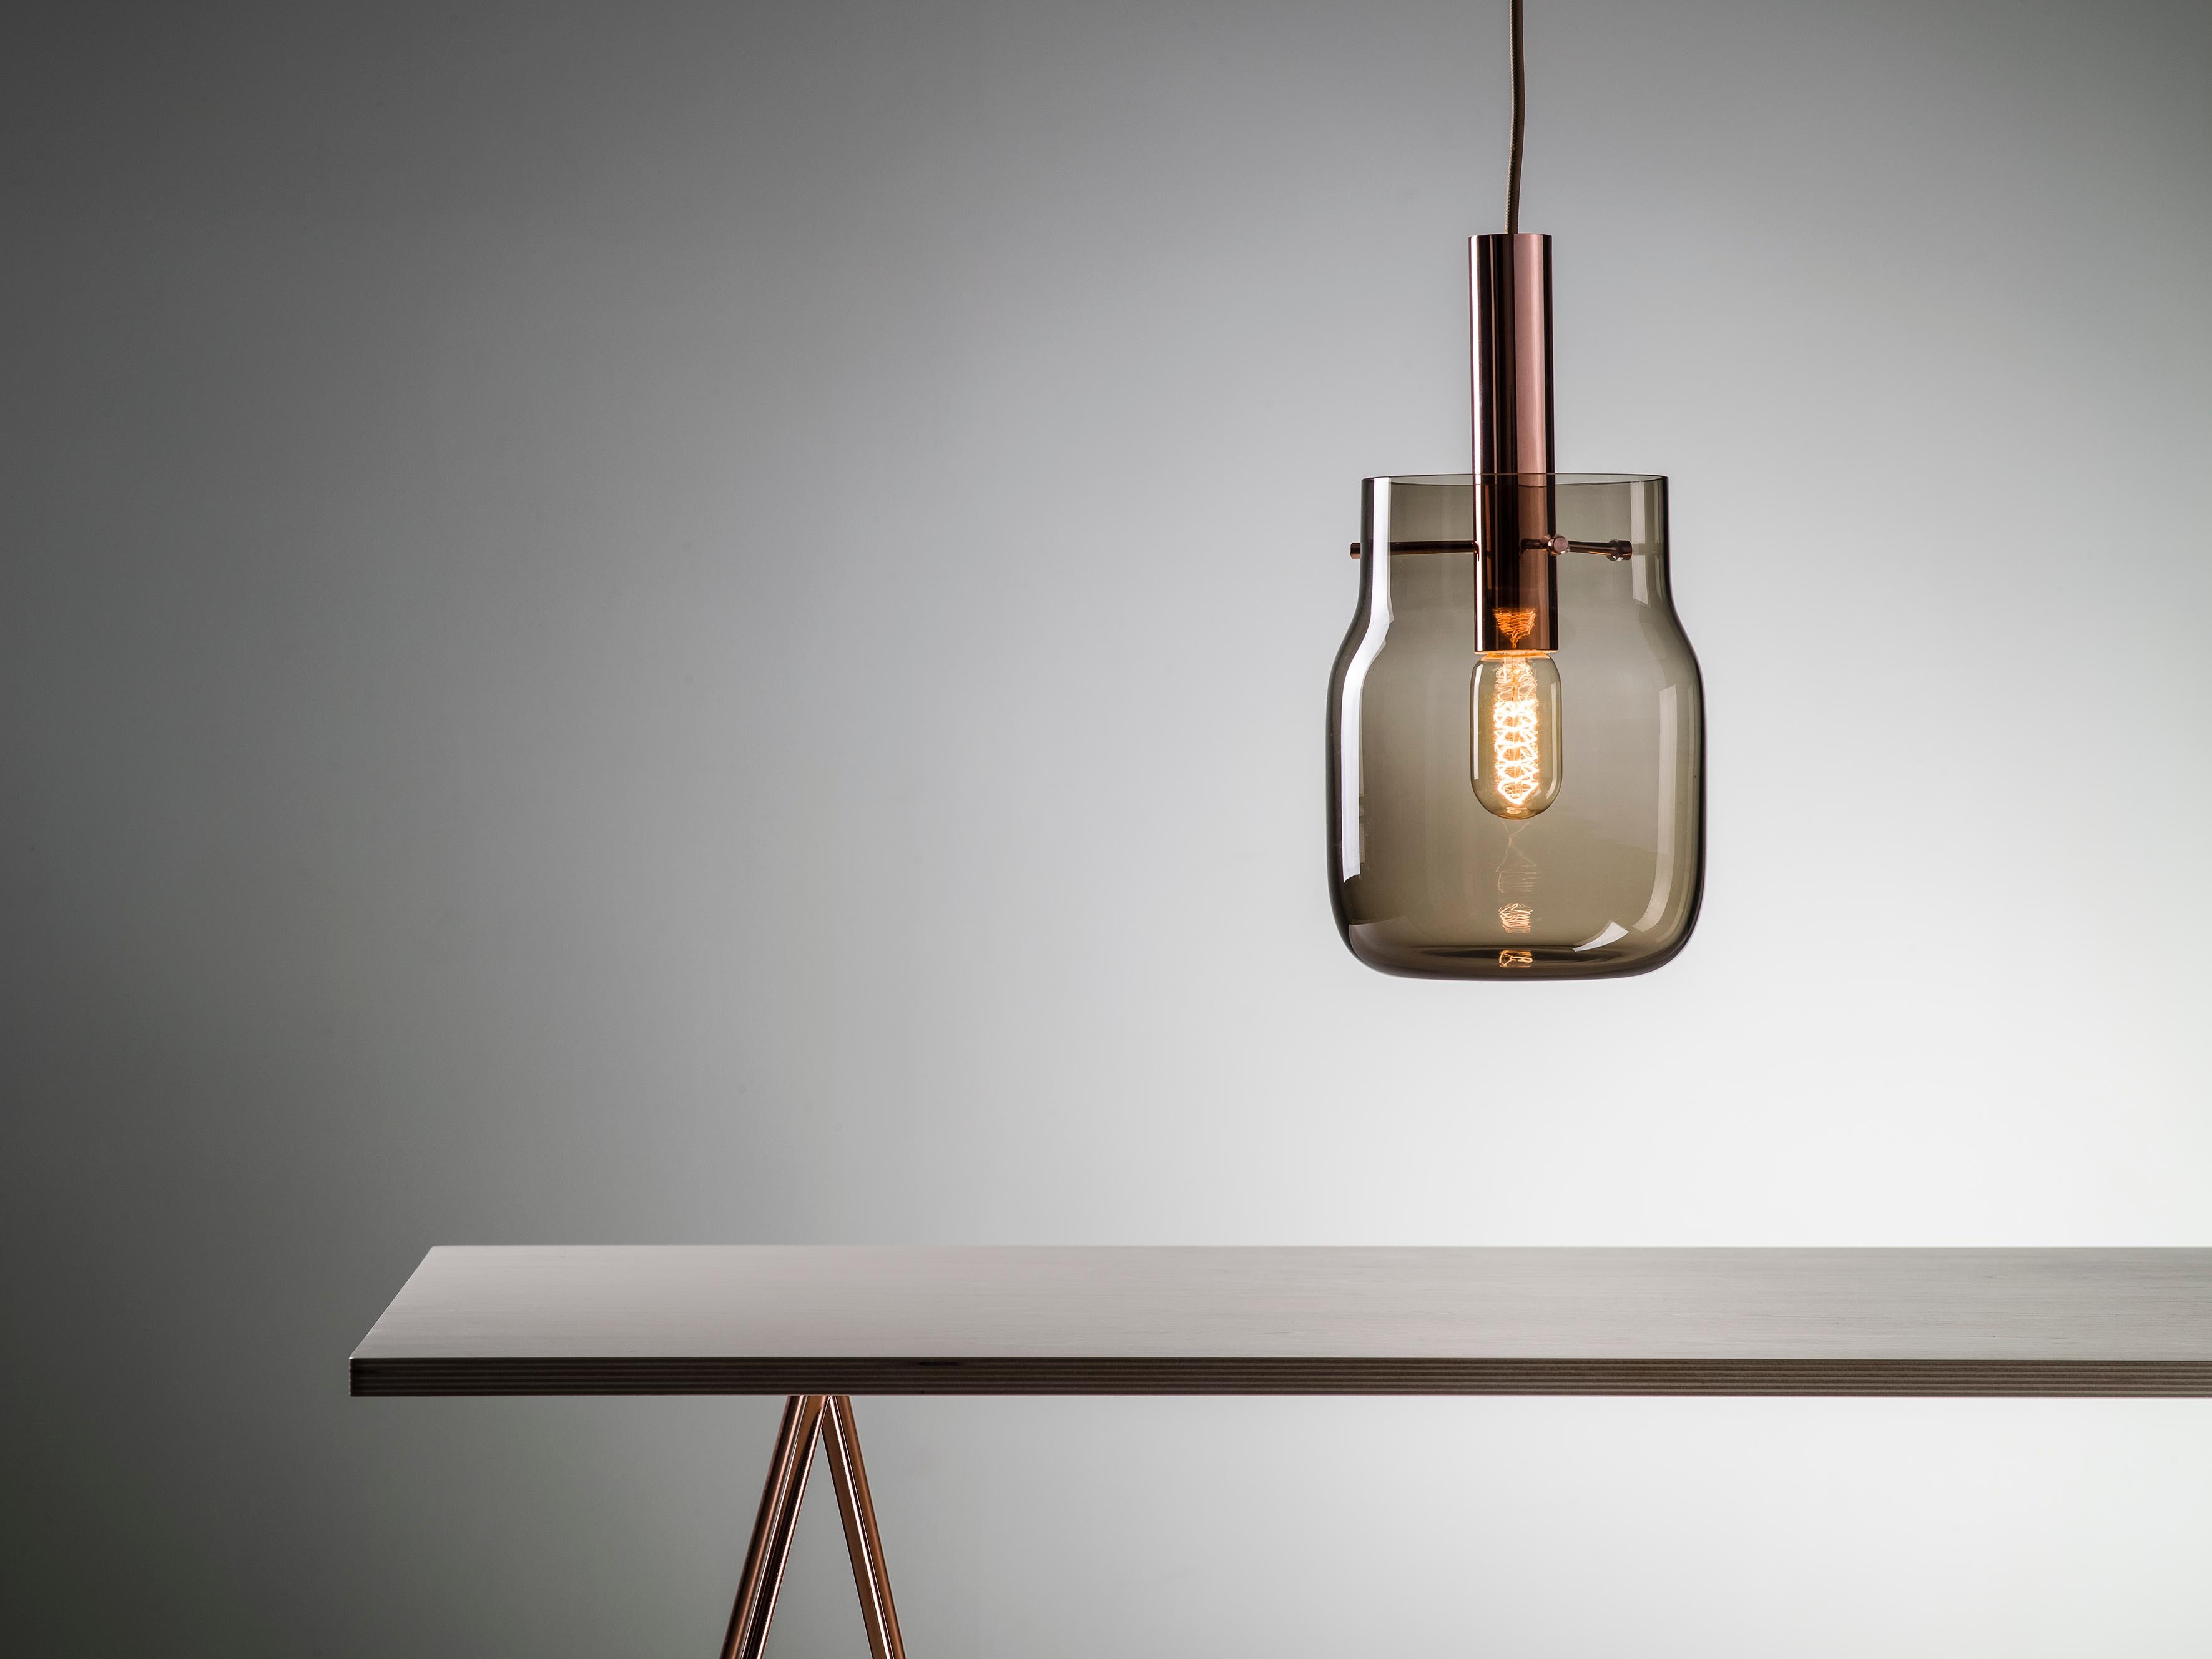 Big Bandaska Pendant Light by Dechem Studio
Dimensions: D 18 x H 180 cm
Materials: Brass, Glass.
Also Available: Different colours and sizes available,

Hand-blown into beech wood moulds, Bandaska Lights is based on the highly popular Bandaska